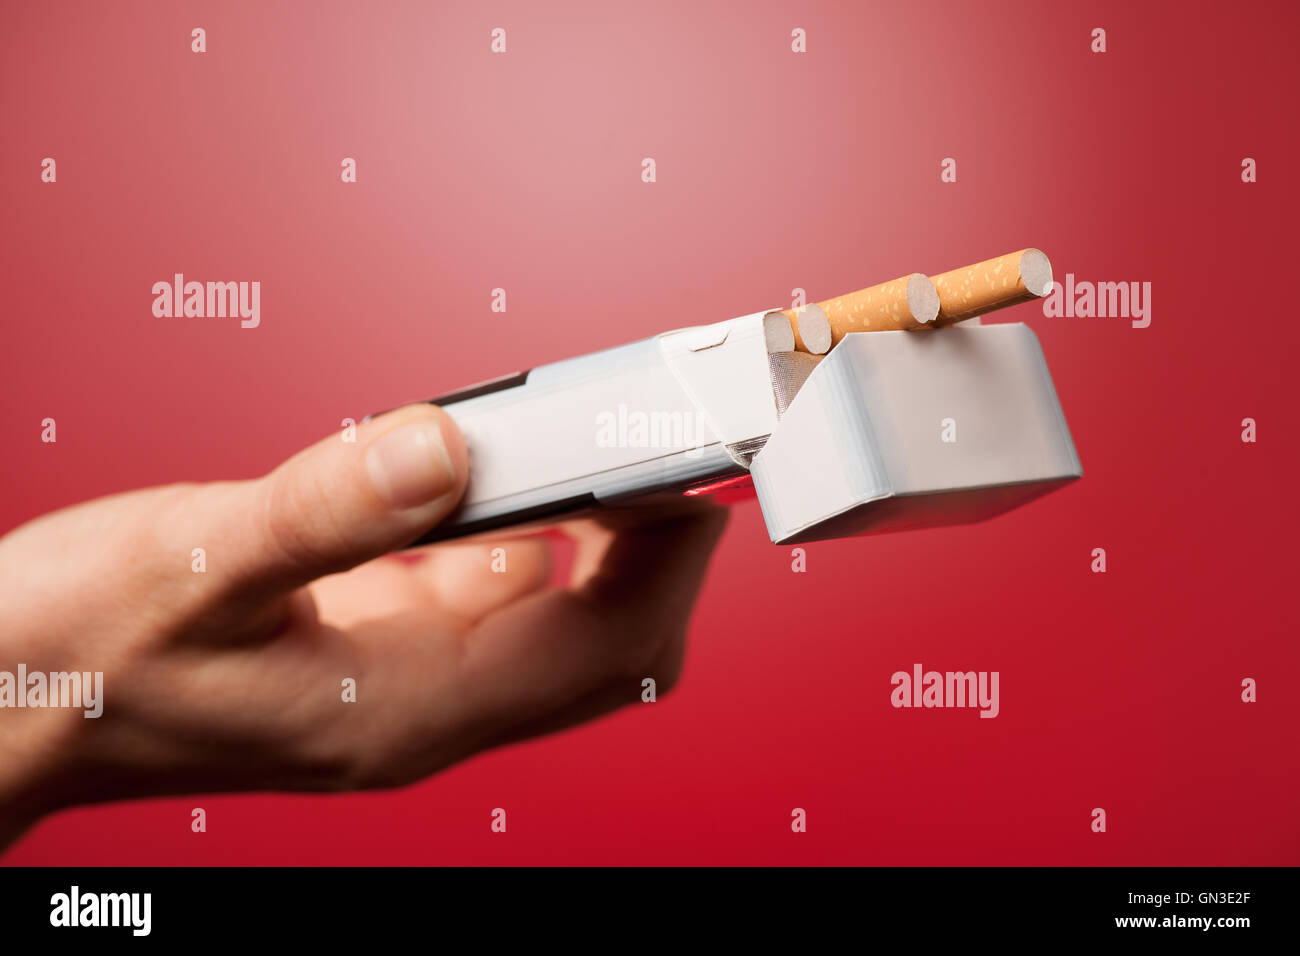 woman offering a cigarette over red background Stock Photo